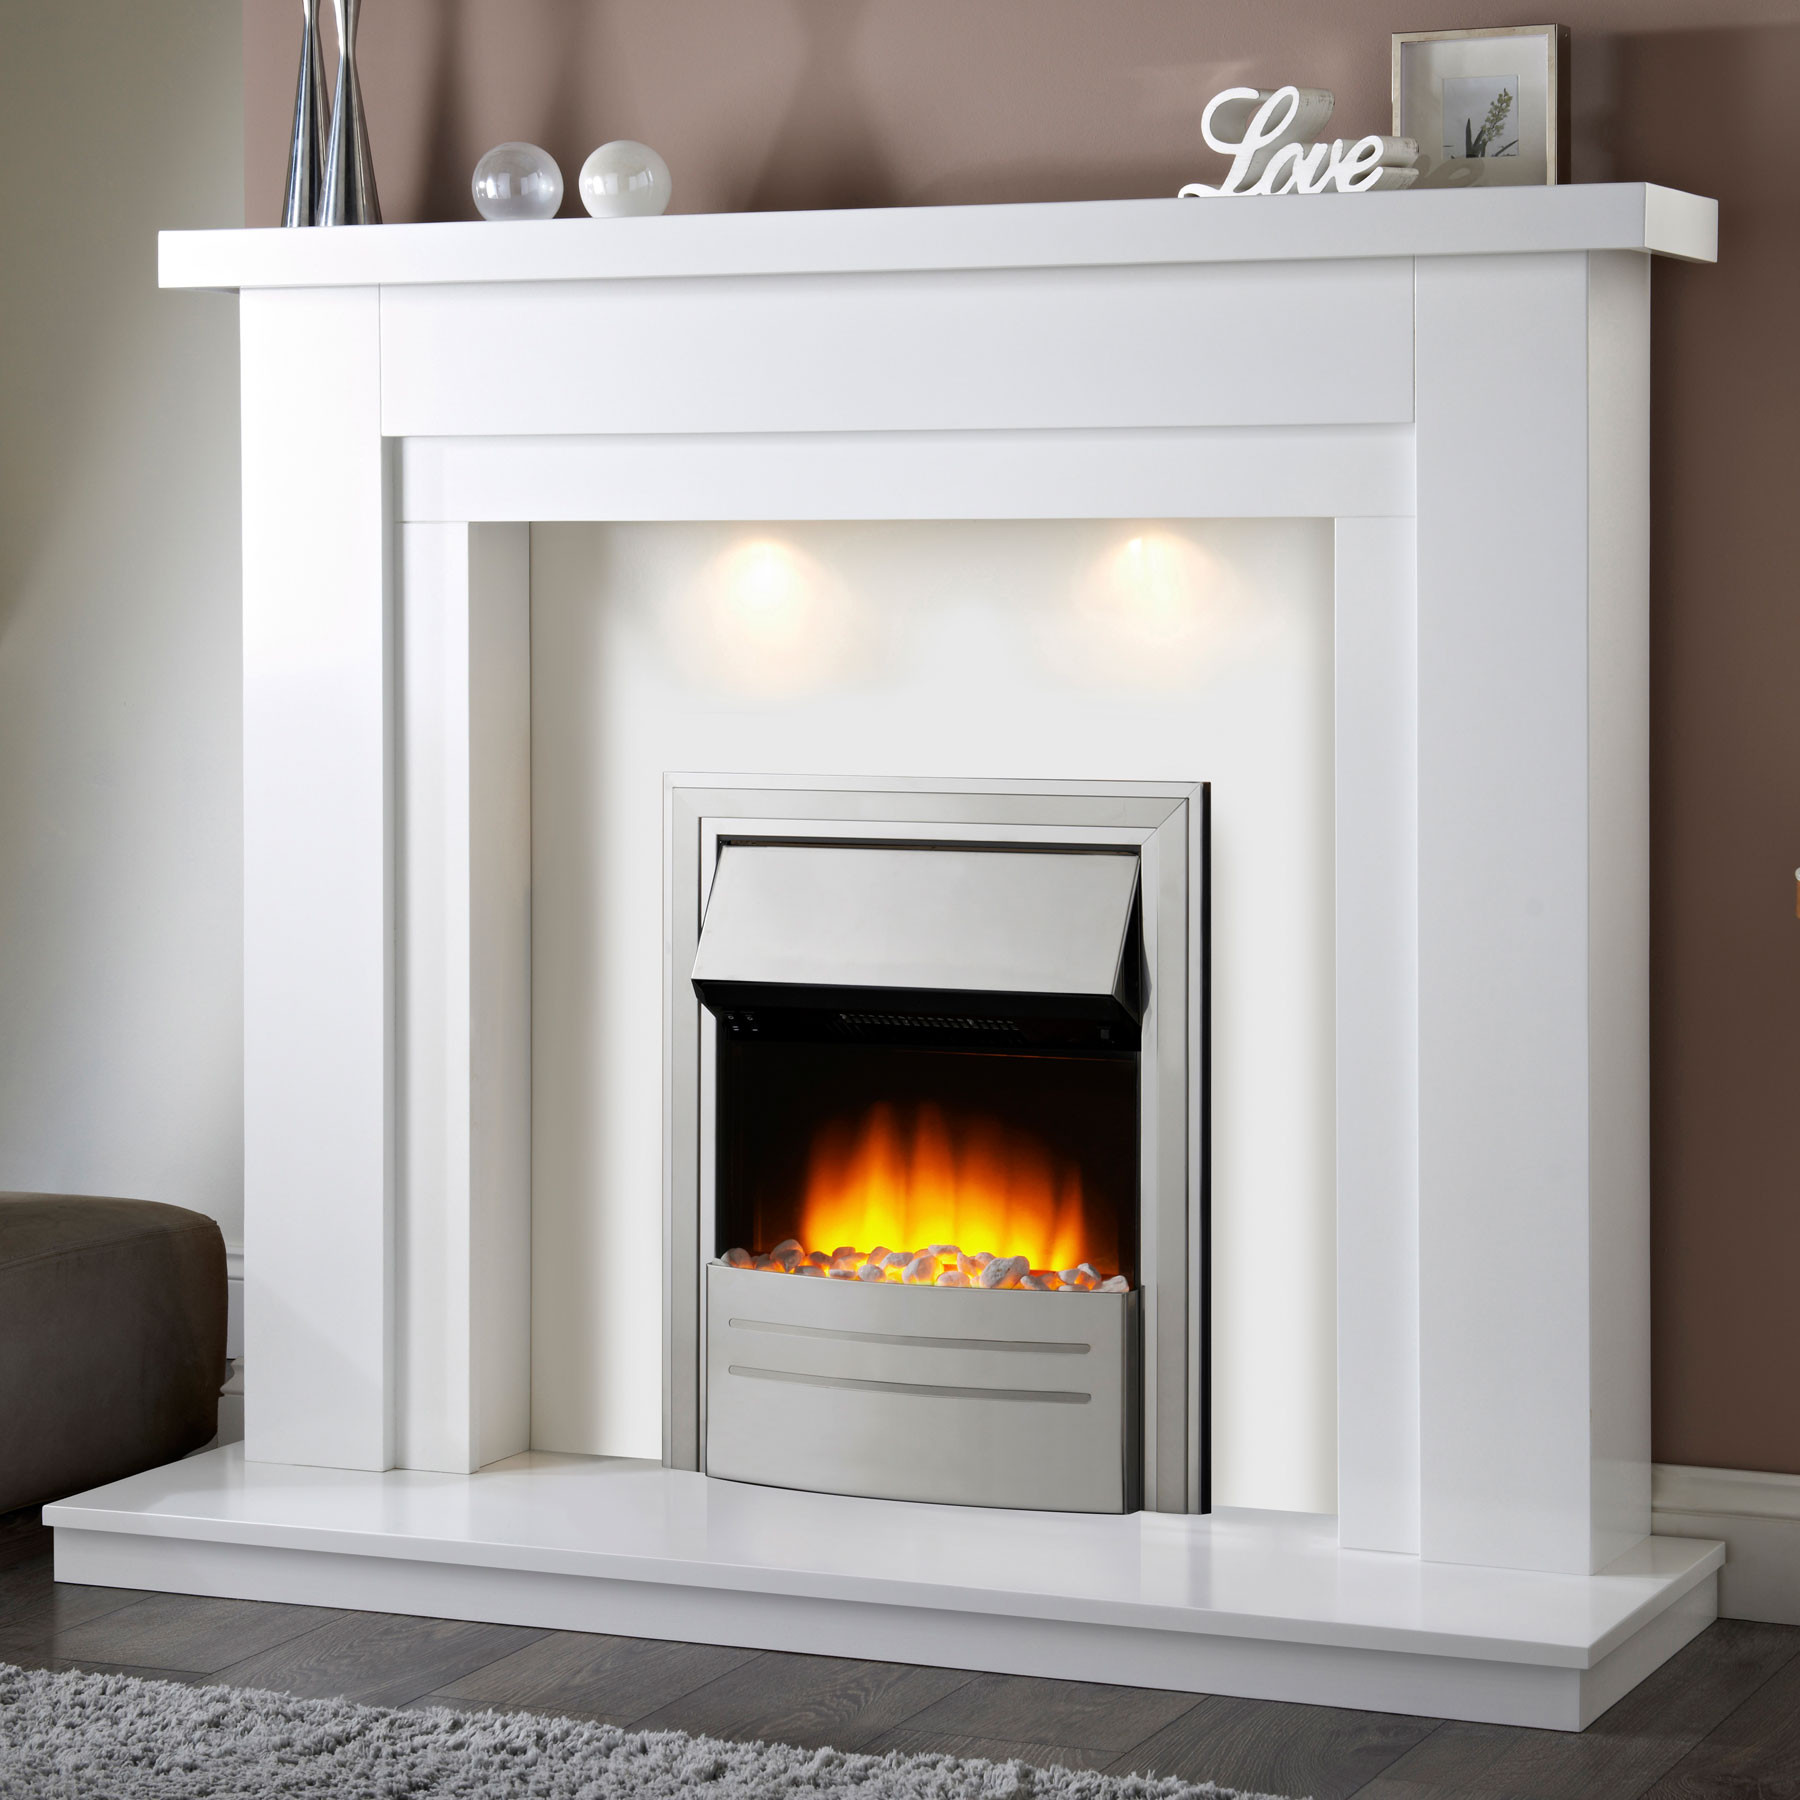 Kingsman Fireplaces New White Fireplace Electric Charming Fireplace